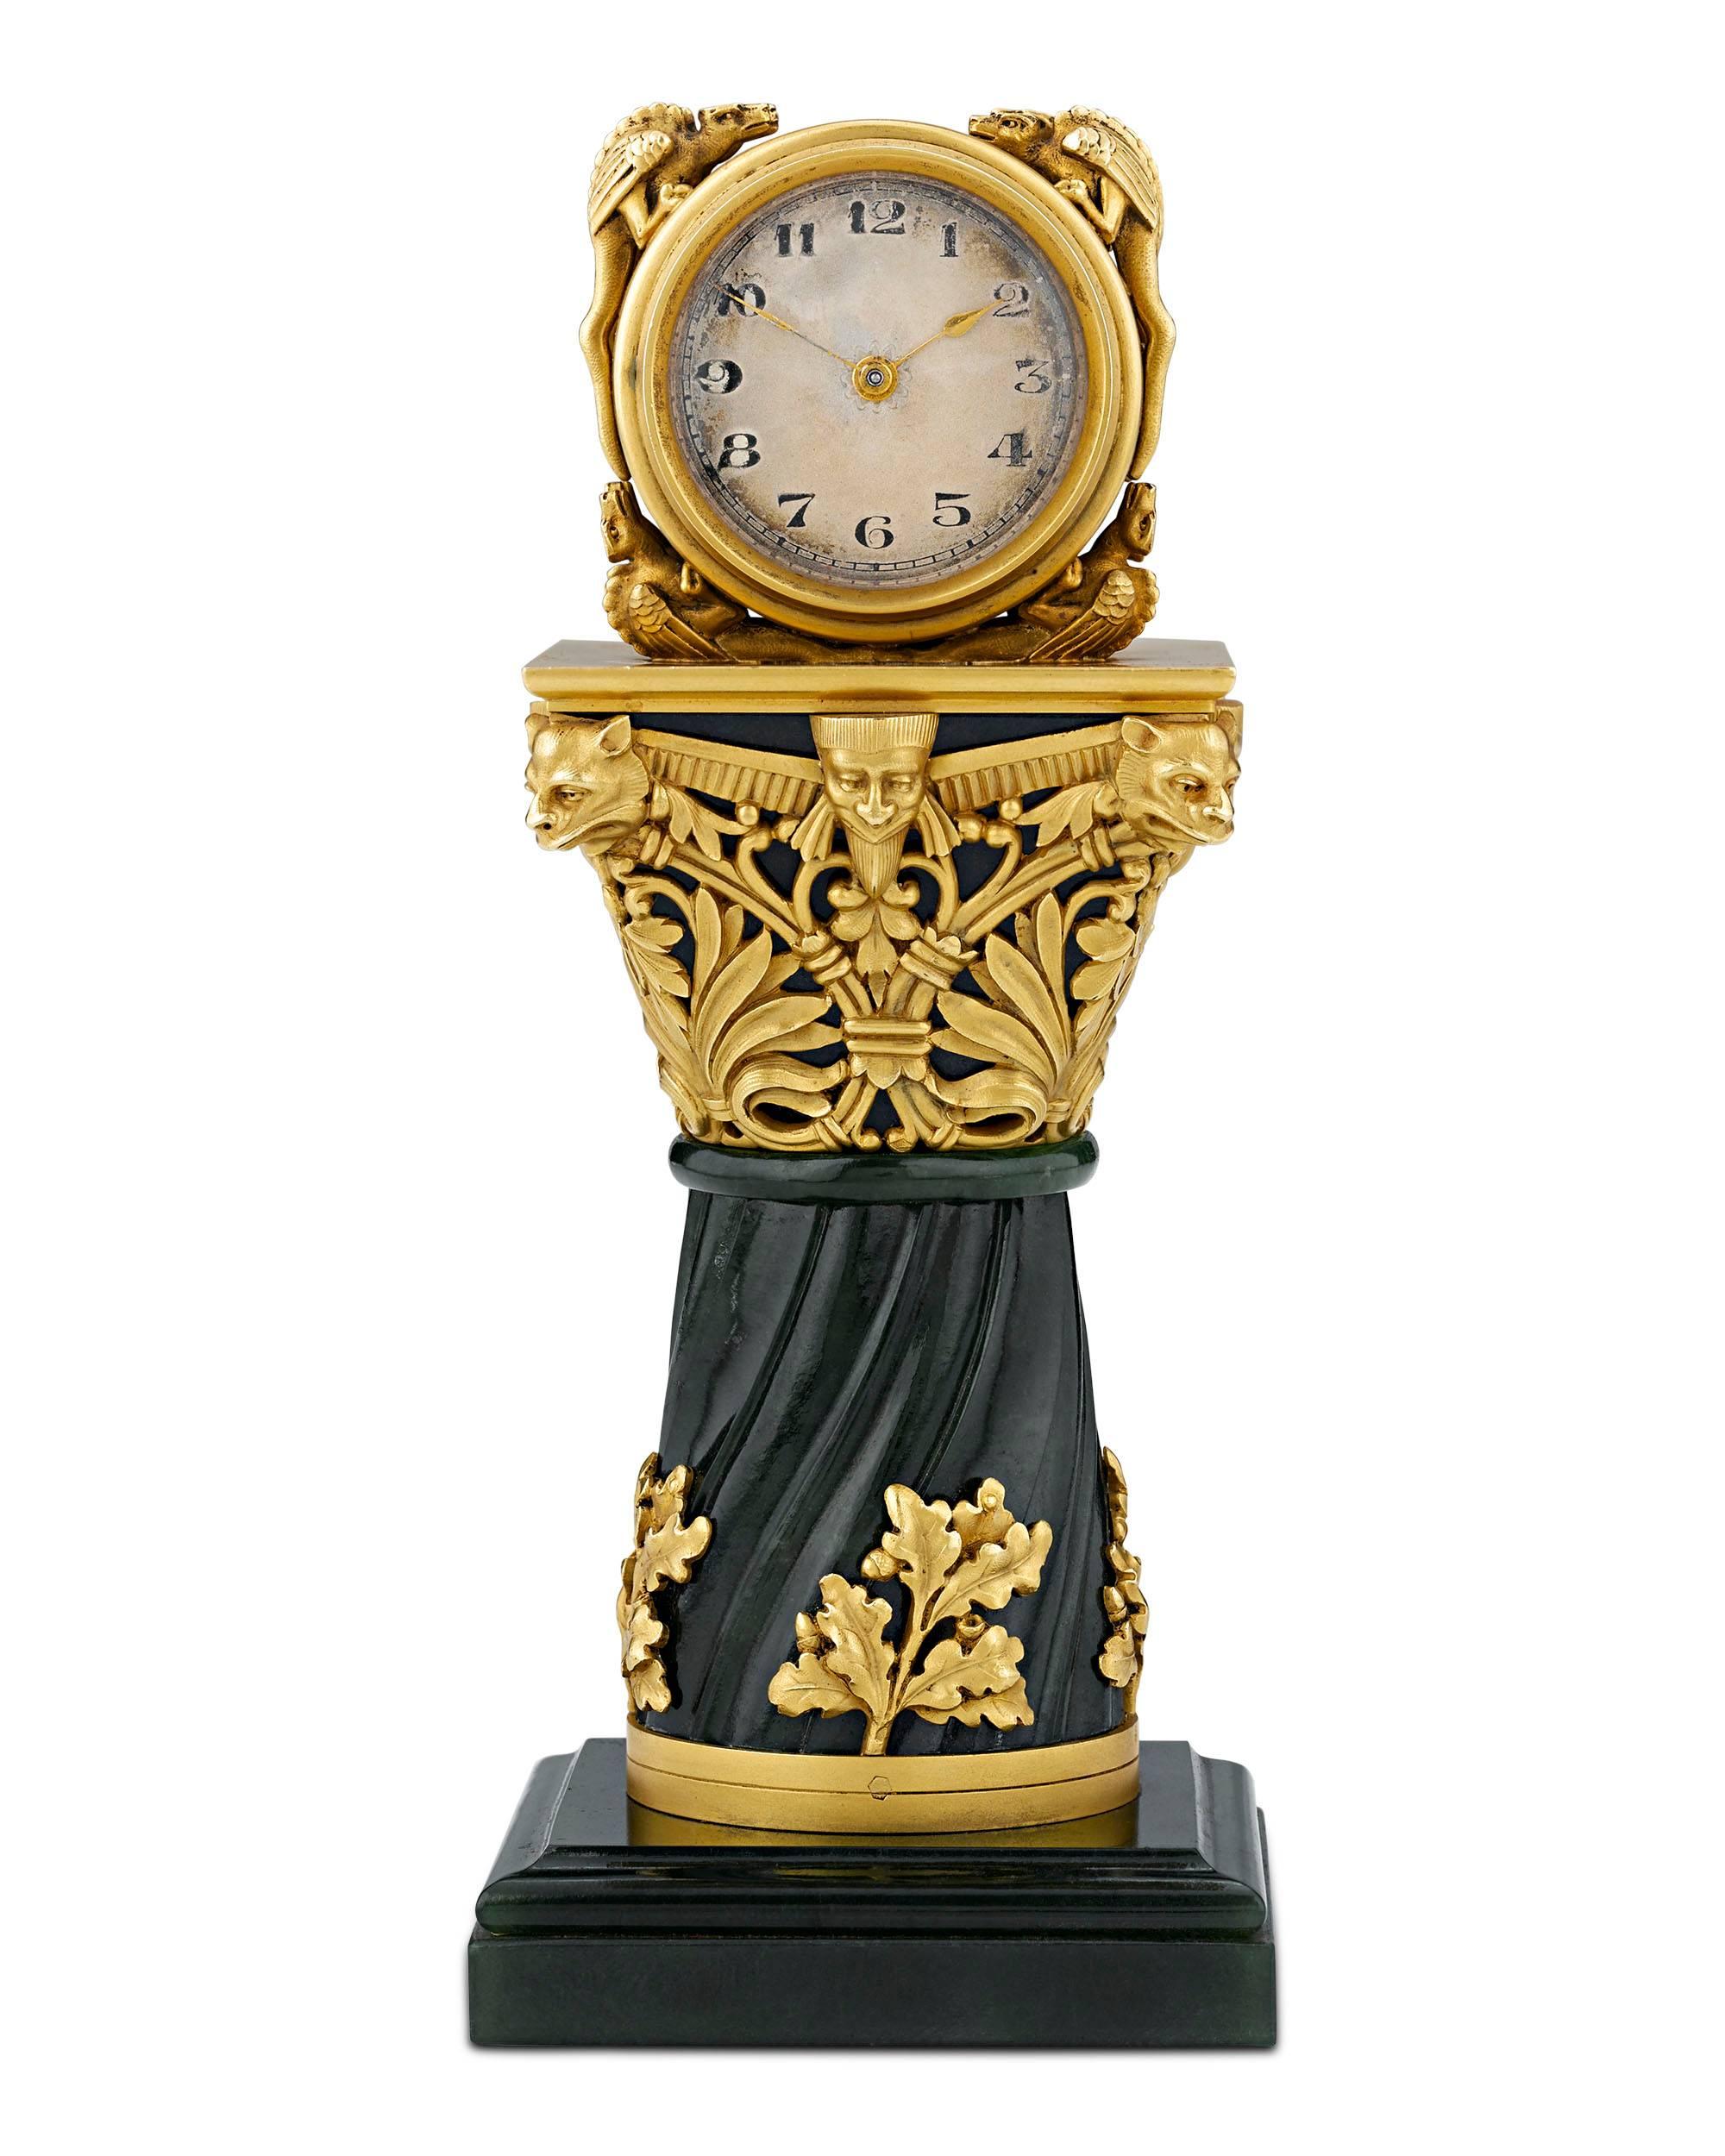 An exceptionally rare objet d'art, this opulent and incredibly rare French miniature clock is crafted of solid 18-karat gold and jade. Crafted by Parisian jeweler Paul Frey and retailed by Gompers, this handcrafted masterpiece is exemplary of the